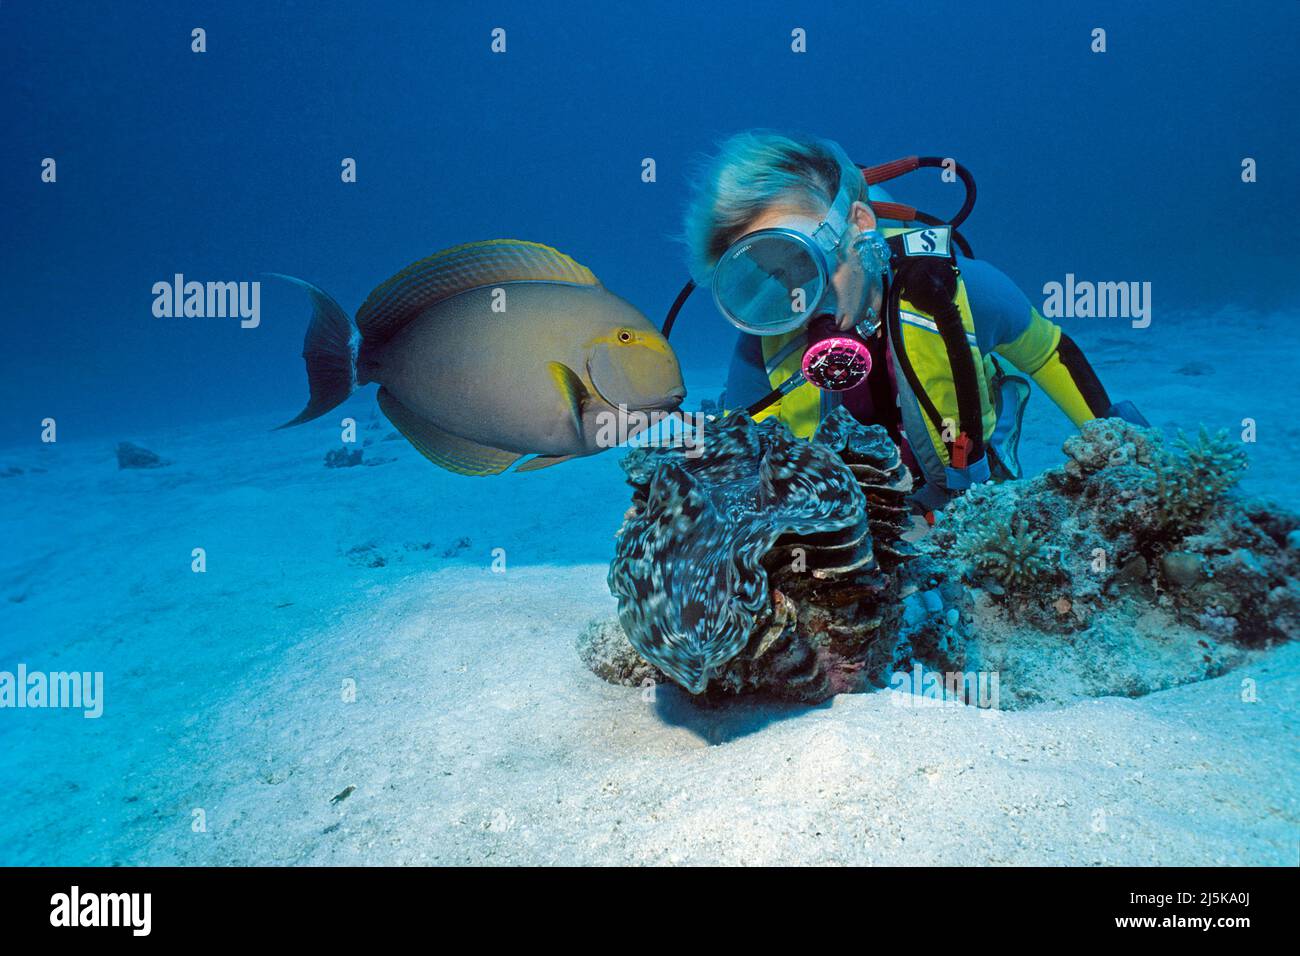 Scuba diver watches a Yellowfin surgeonfish (Acanthurus xanthopterus) at a Fluted giant clam (Tridacna squamosa), Maldives, Indian ocean, Asia Stock Photo